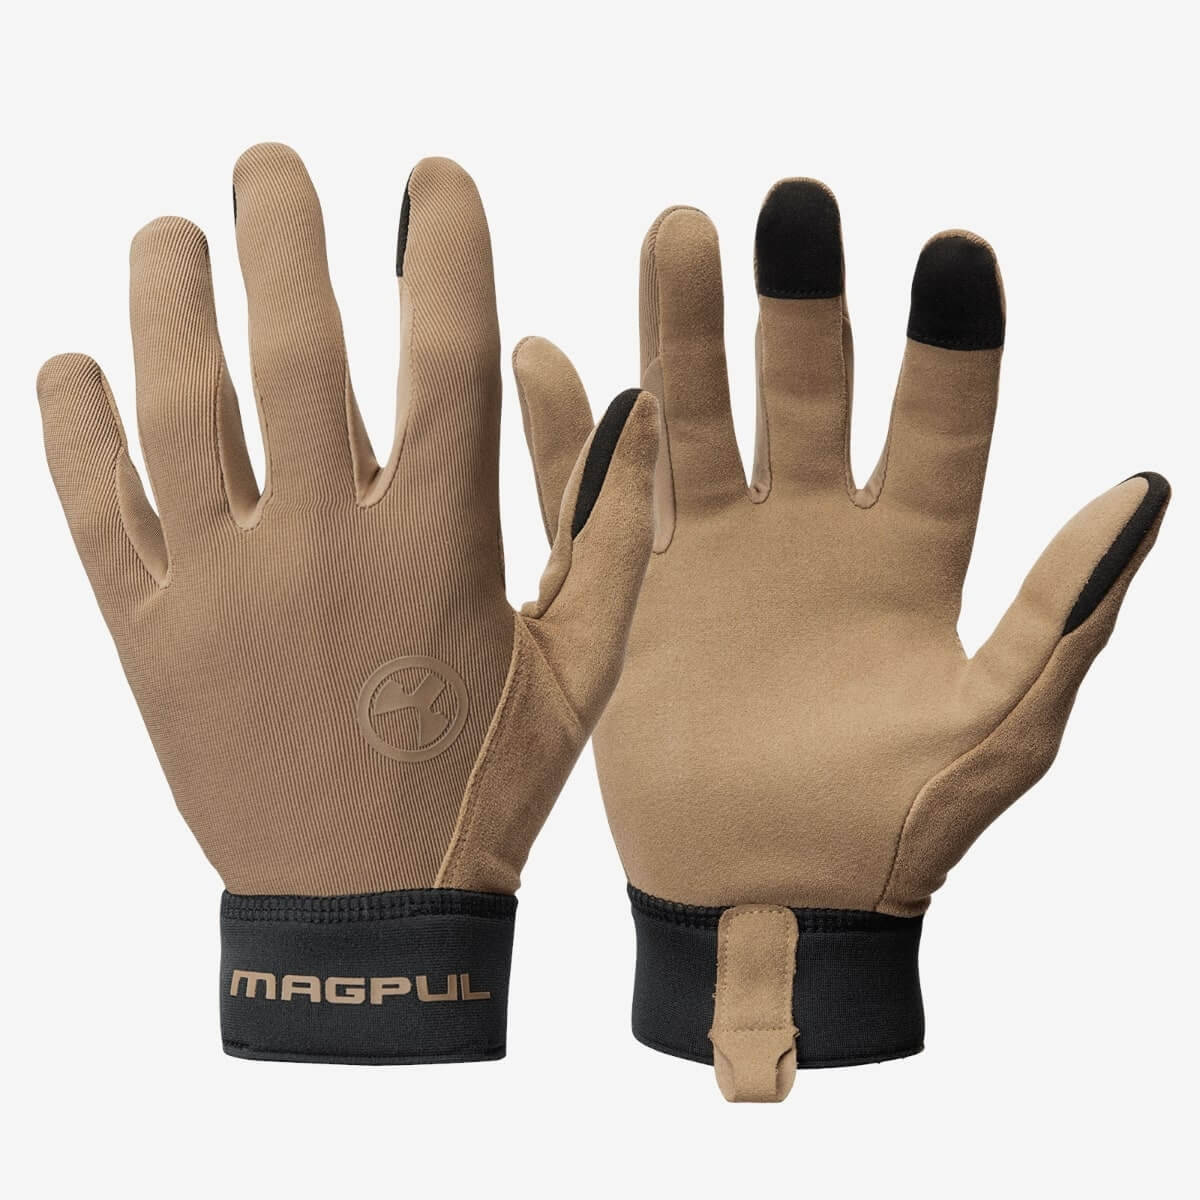 MagpulTechnical Glove 2.0 Coyote X Large